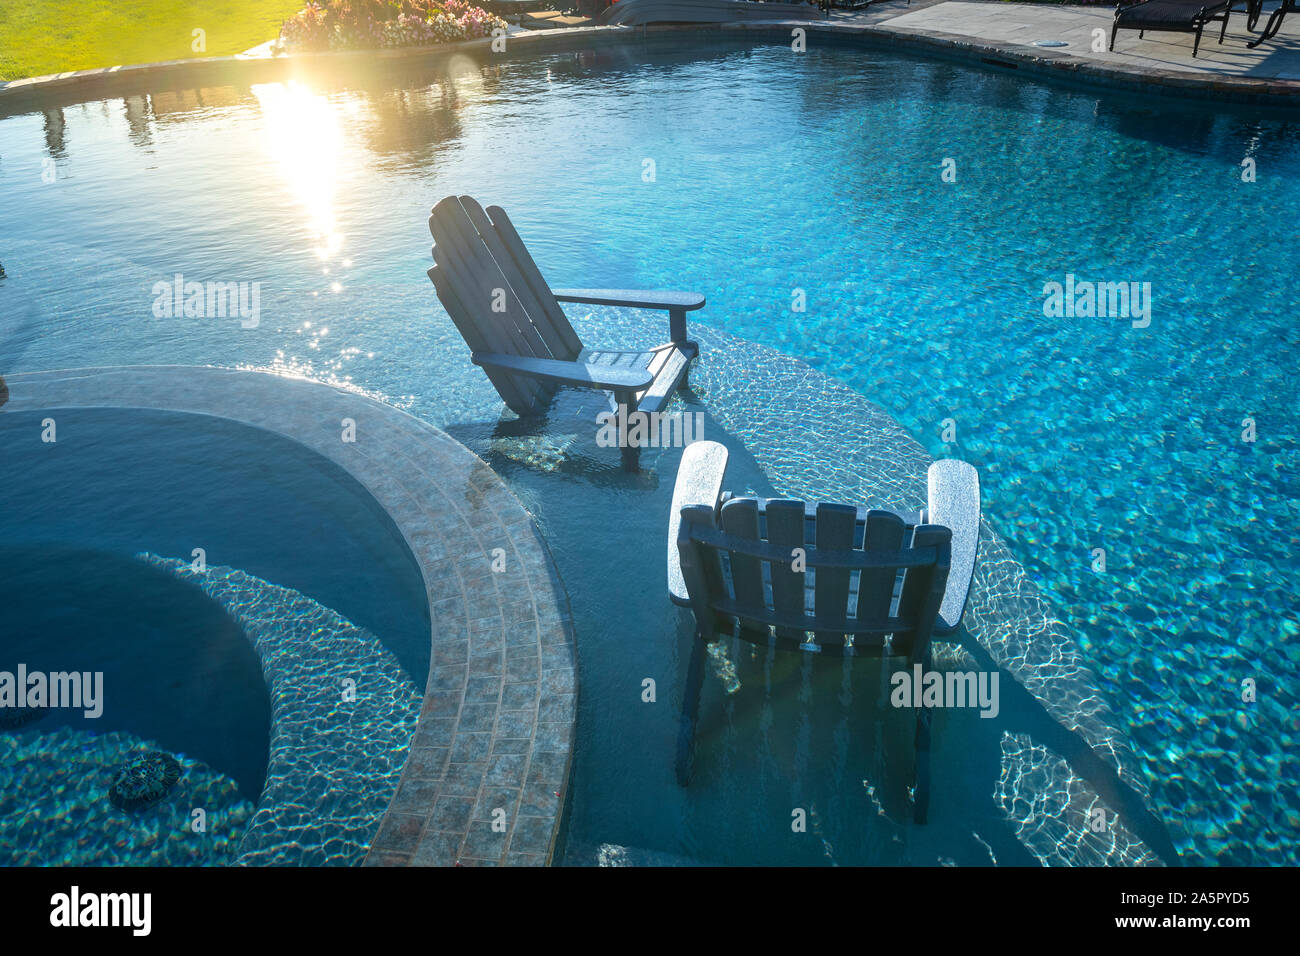 Two Adirondack Chairs in the swimming pool Stock Photo